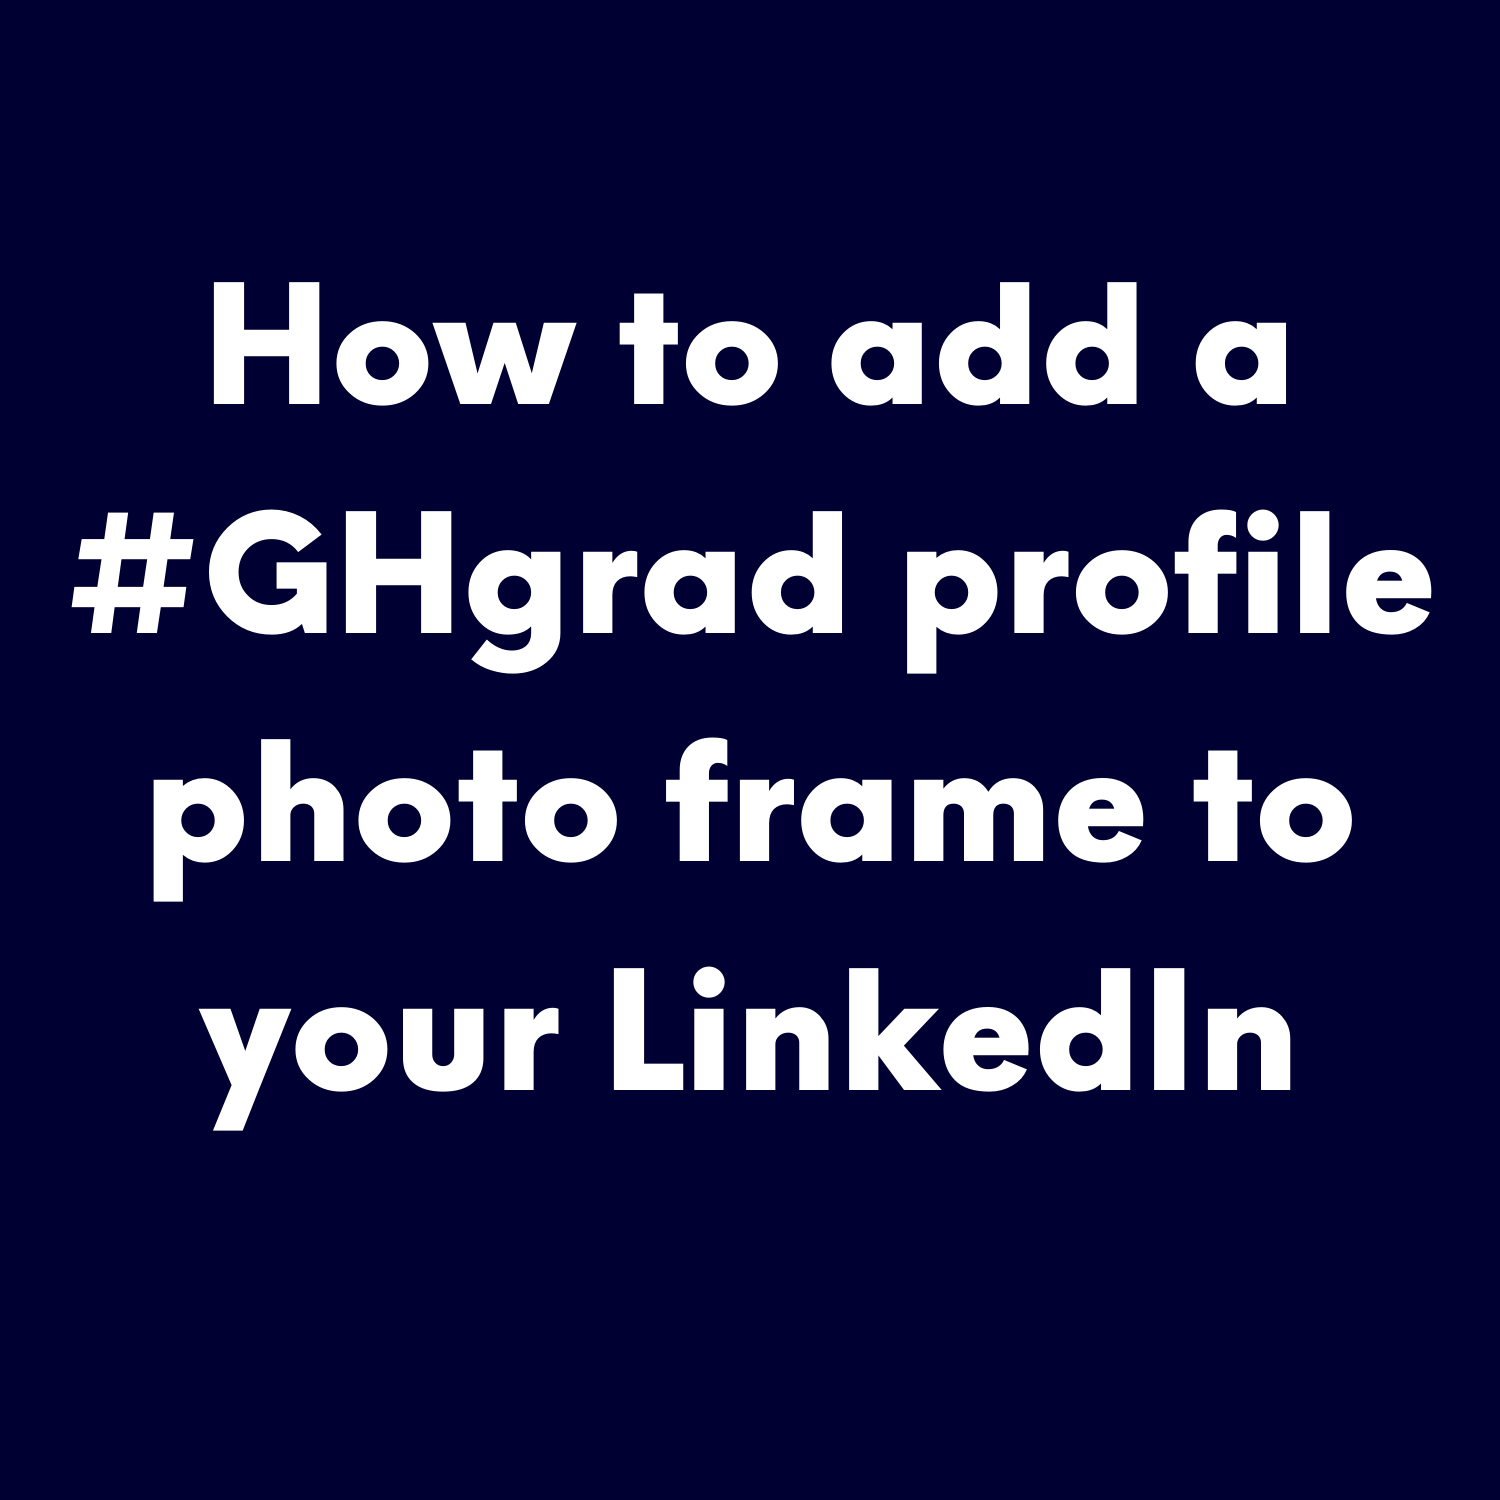 How to add a #GHgrad profile photo frame to your LinkedIn